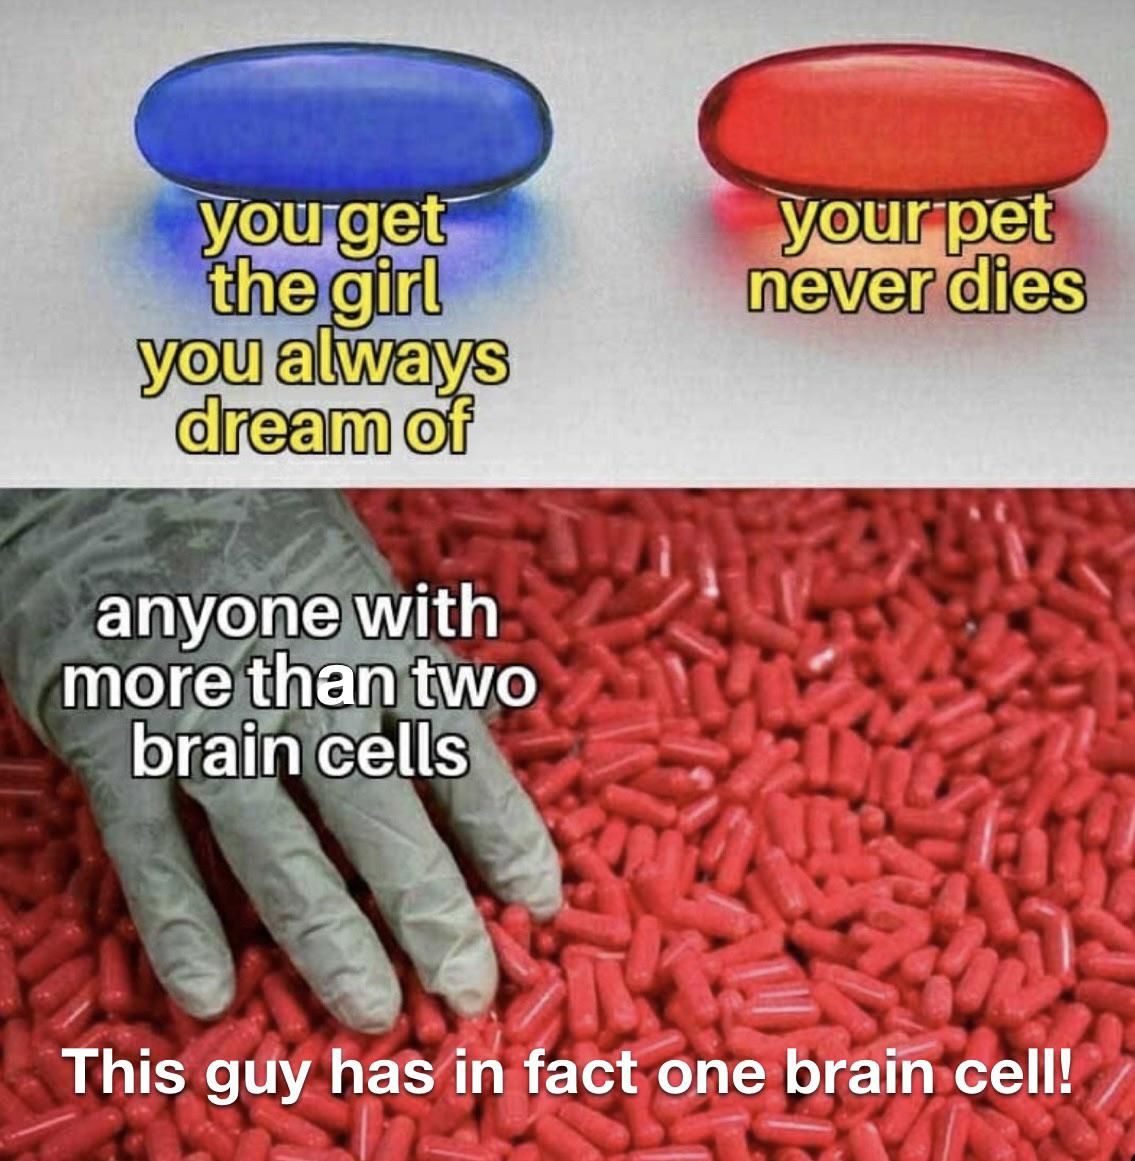 One brain cell..